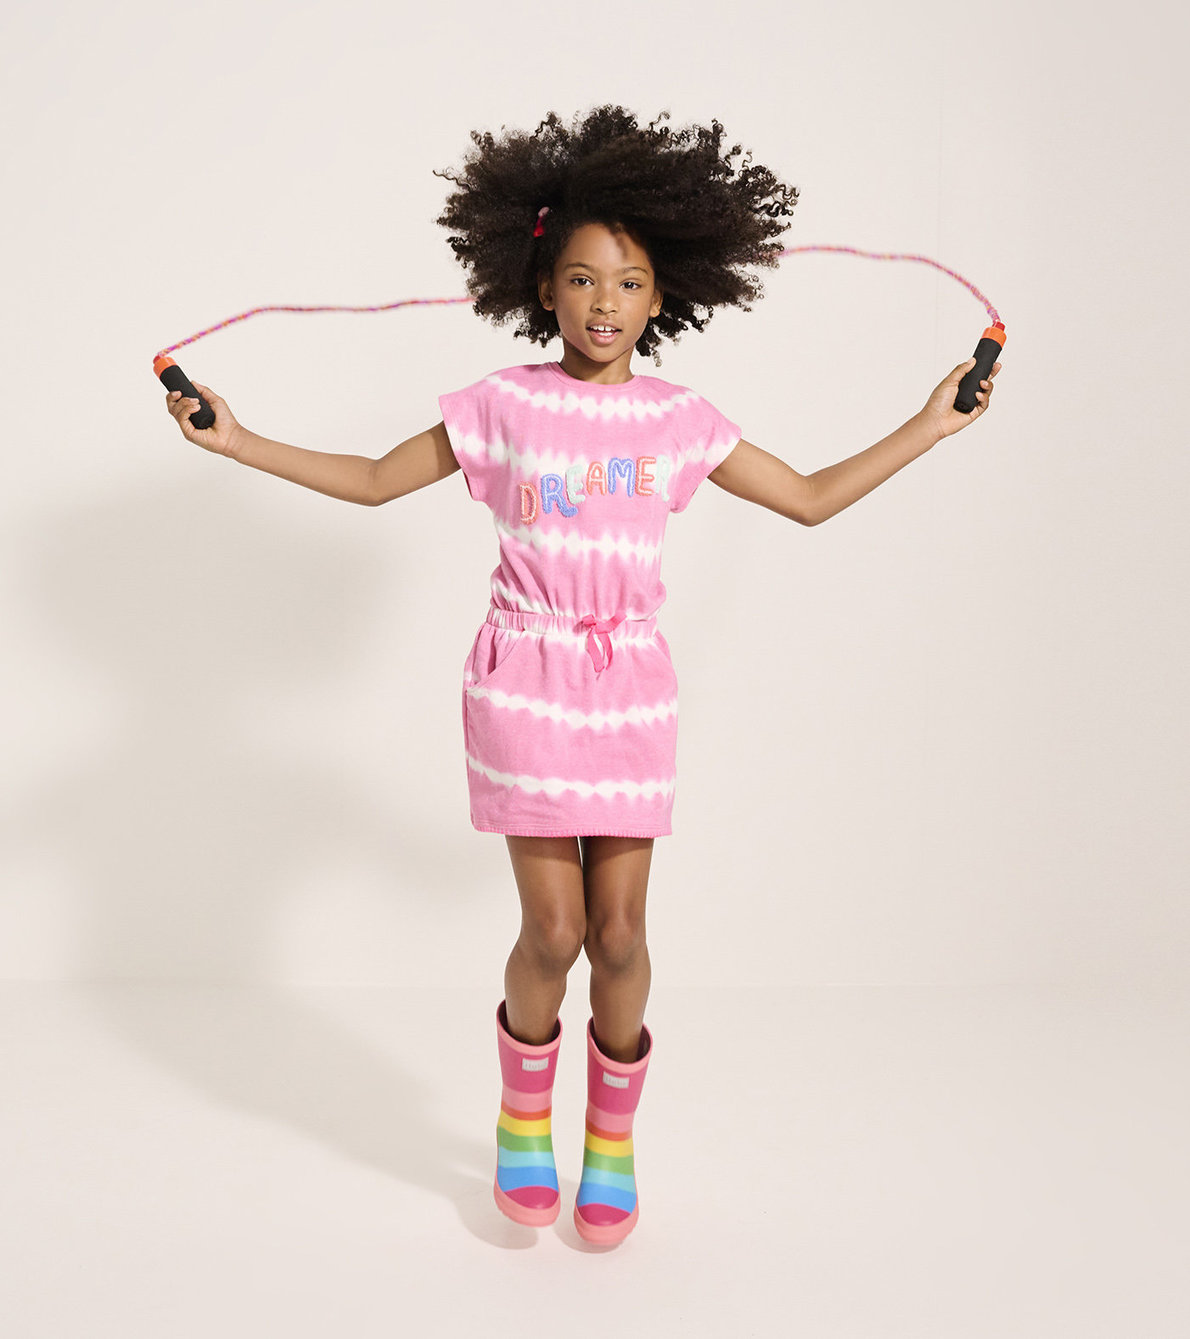 View larger image of Girls Dreamer Pull-On Dress